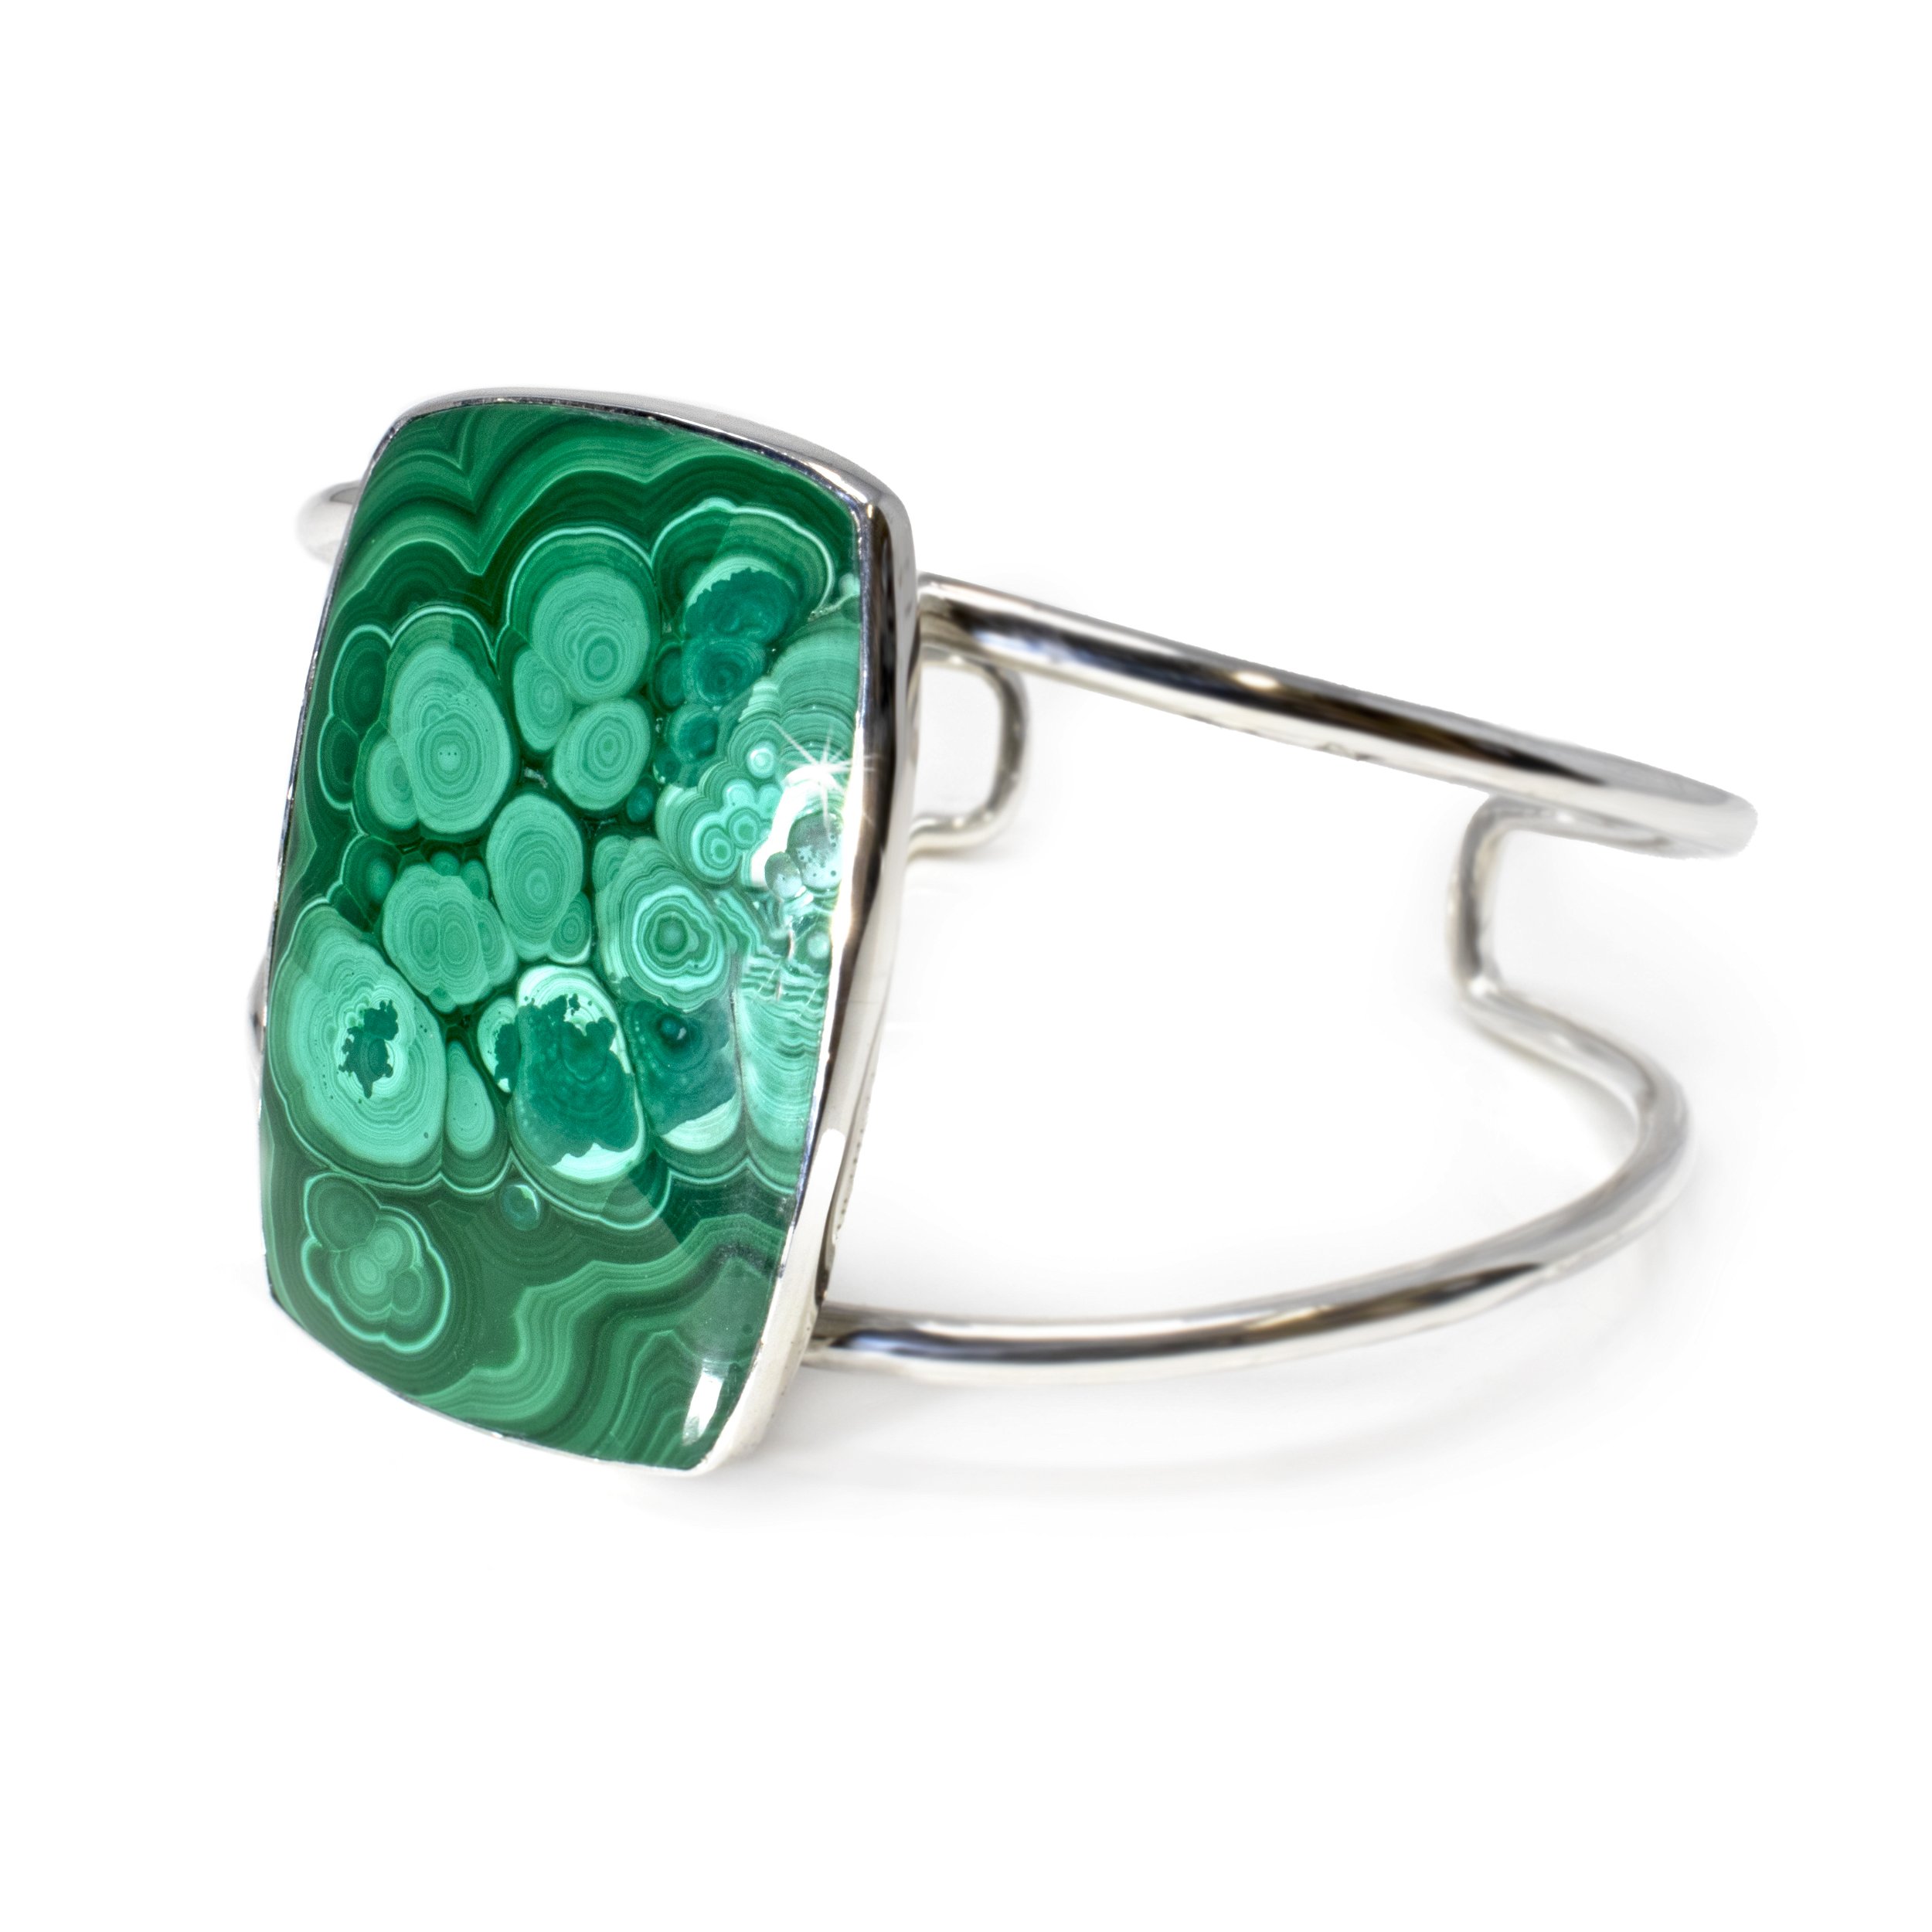 Malachite Cuff Bracelet - Tapered Rectangle Cabochon With Simple Silver Bezel On Open Double Band - Dense Cloud-like Green Banding